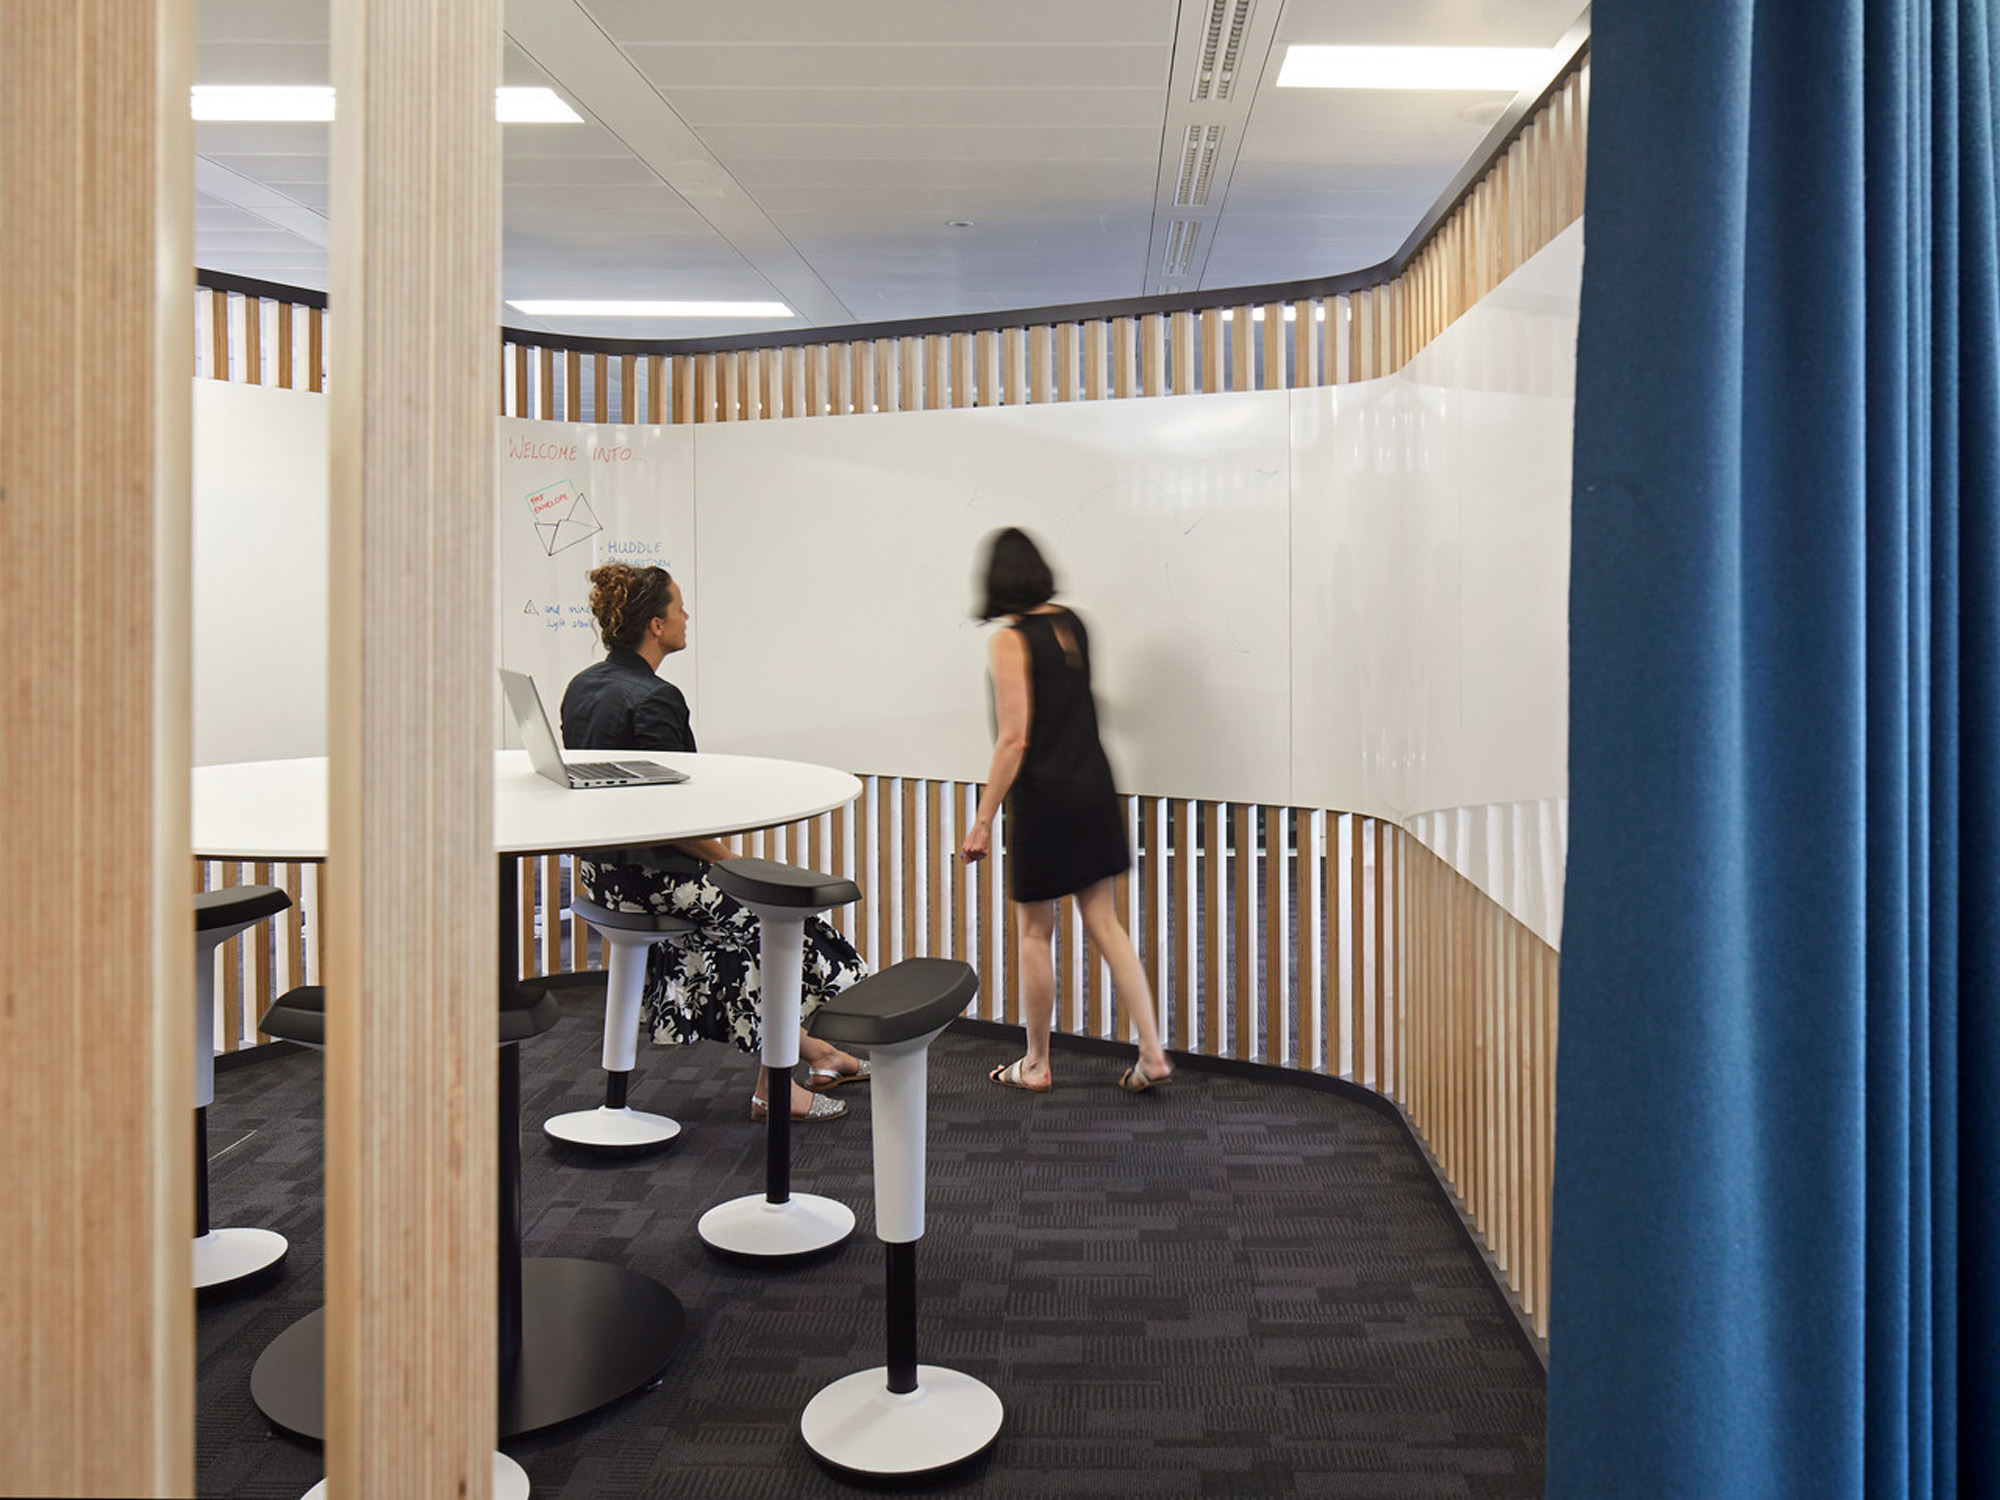 Modern office break area with minimalist white tables and circular black stools. Natural light filters through wooden slatted partitions, enhancing the open yet private ambiance. A whiteboard is mounted on the wall for collaboration.